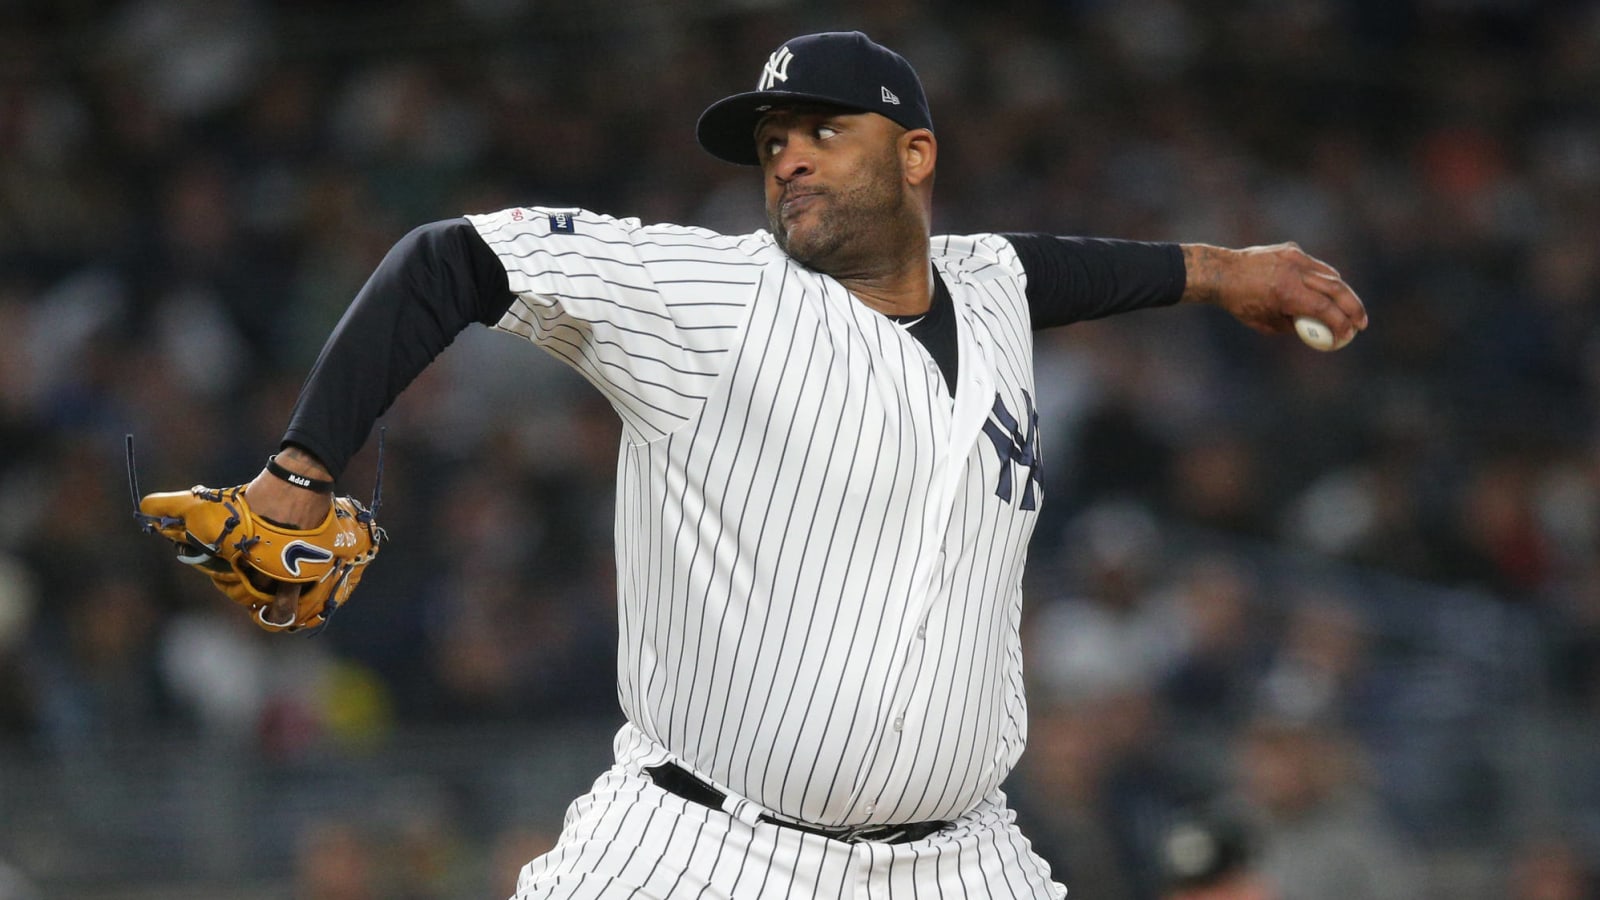 Former Yankees pitcher C.C. Sabathia getting in shape during retirement